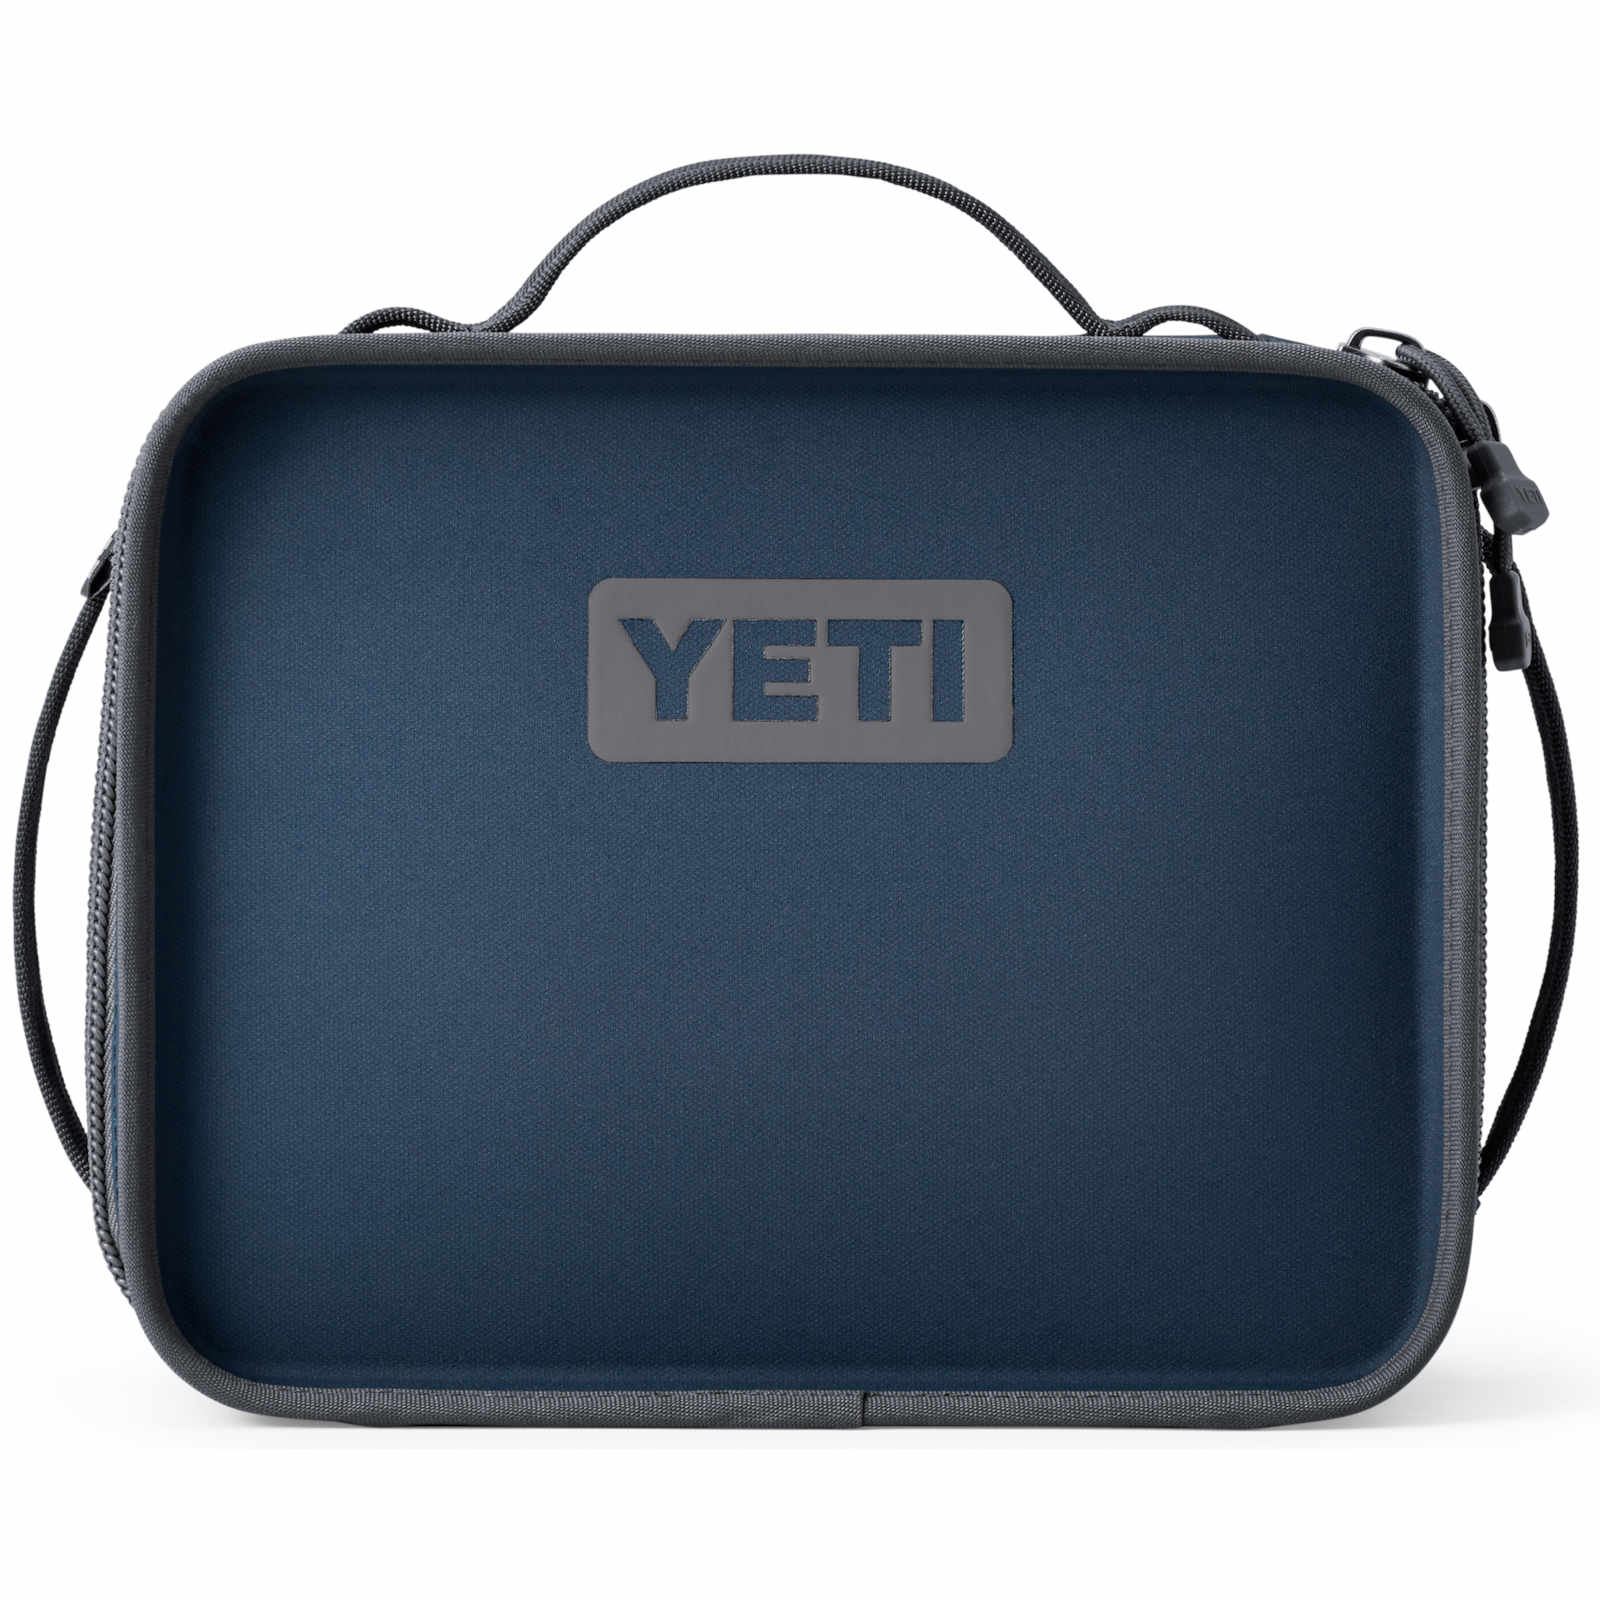 YETI CORAL 🪸 DayTrip Lunch Box - Limited Edition Color - NWT RARE  Discontinued